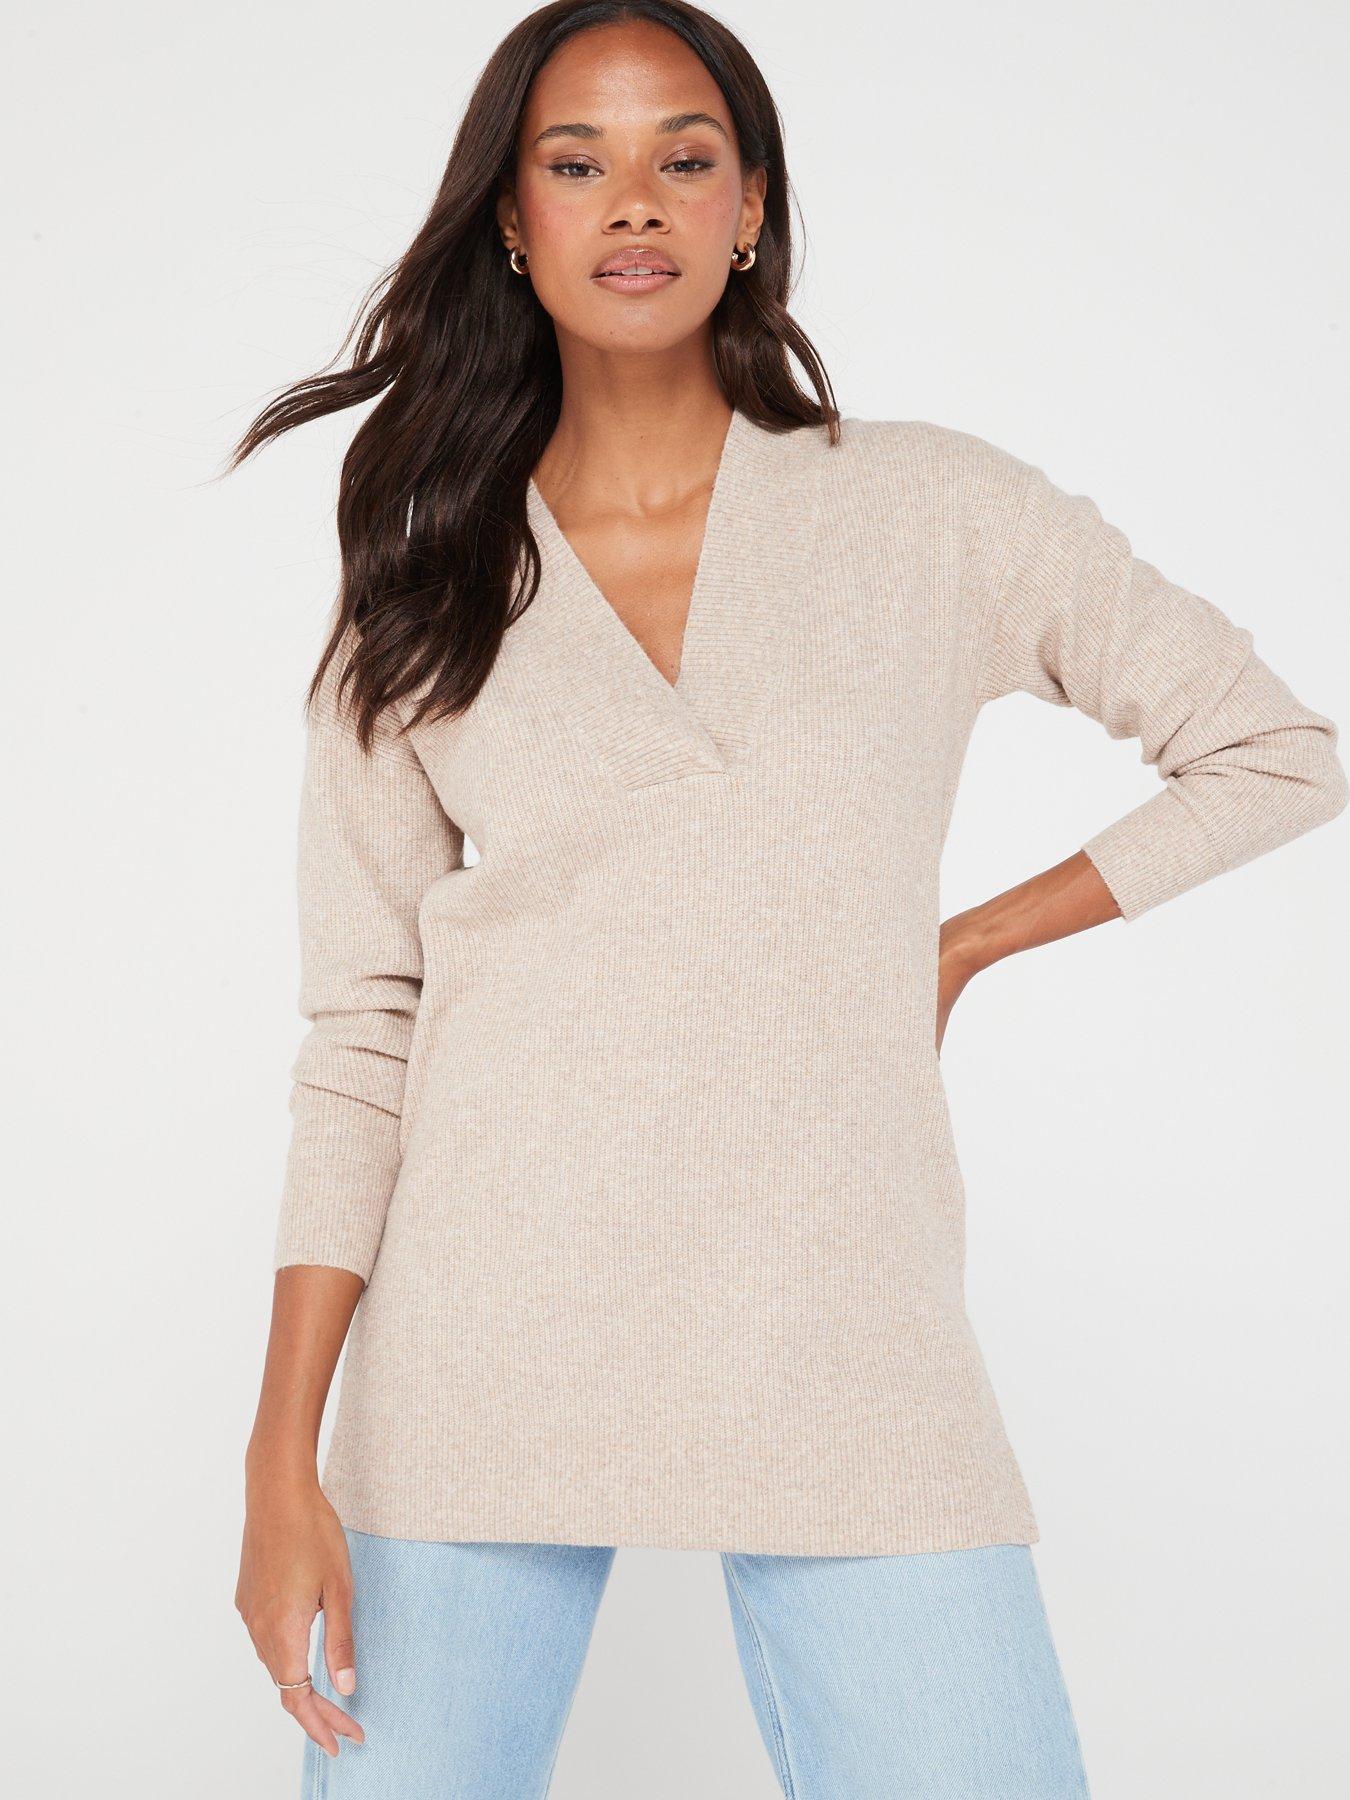 Turtleneck blouse with front slit and cuffed sleeves in beige